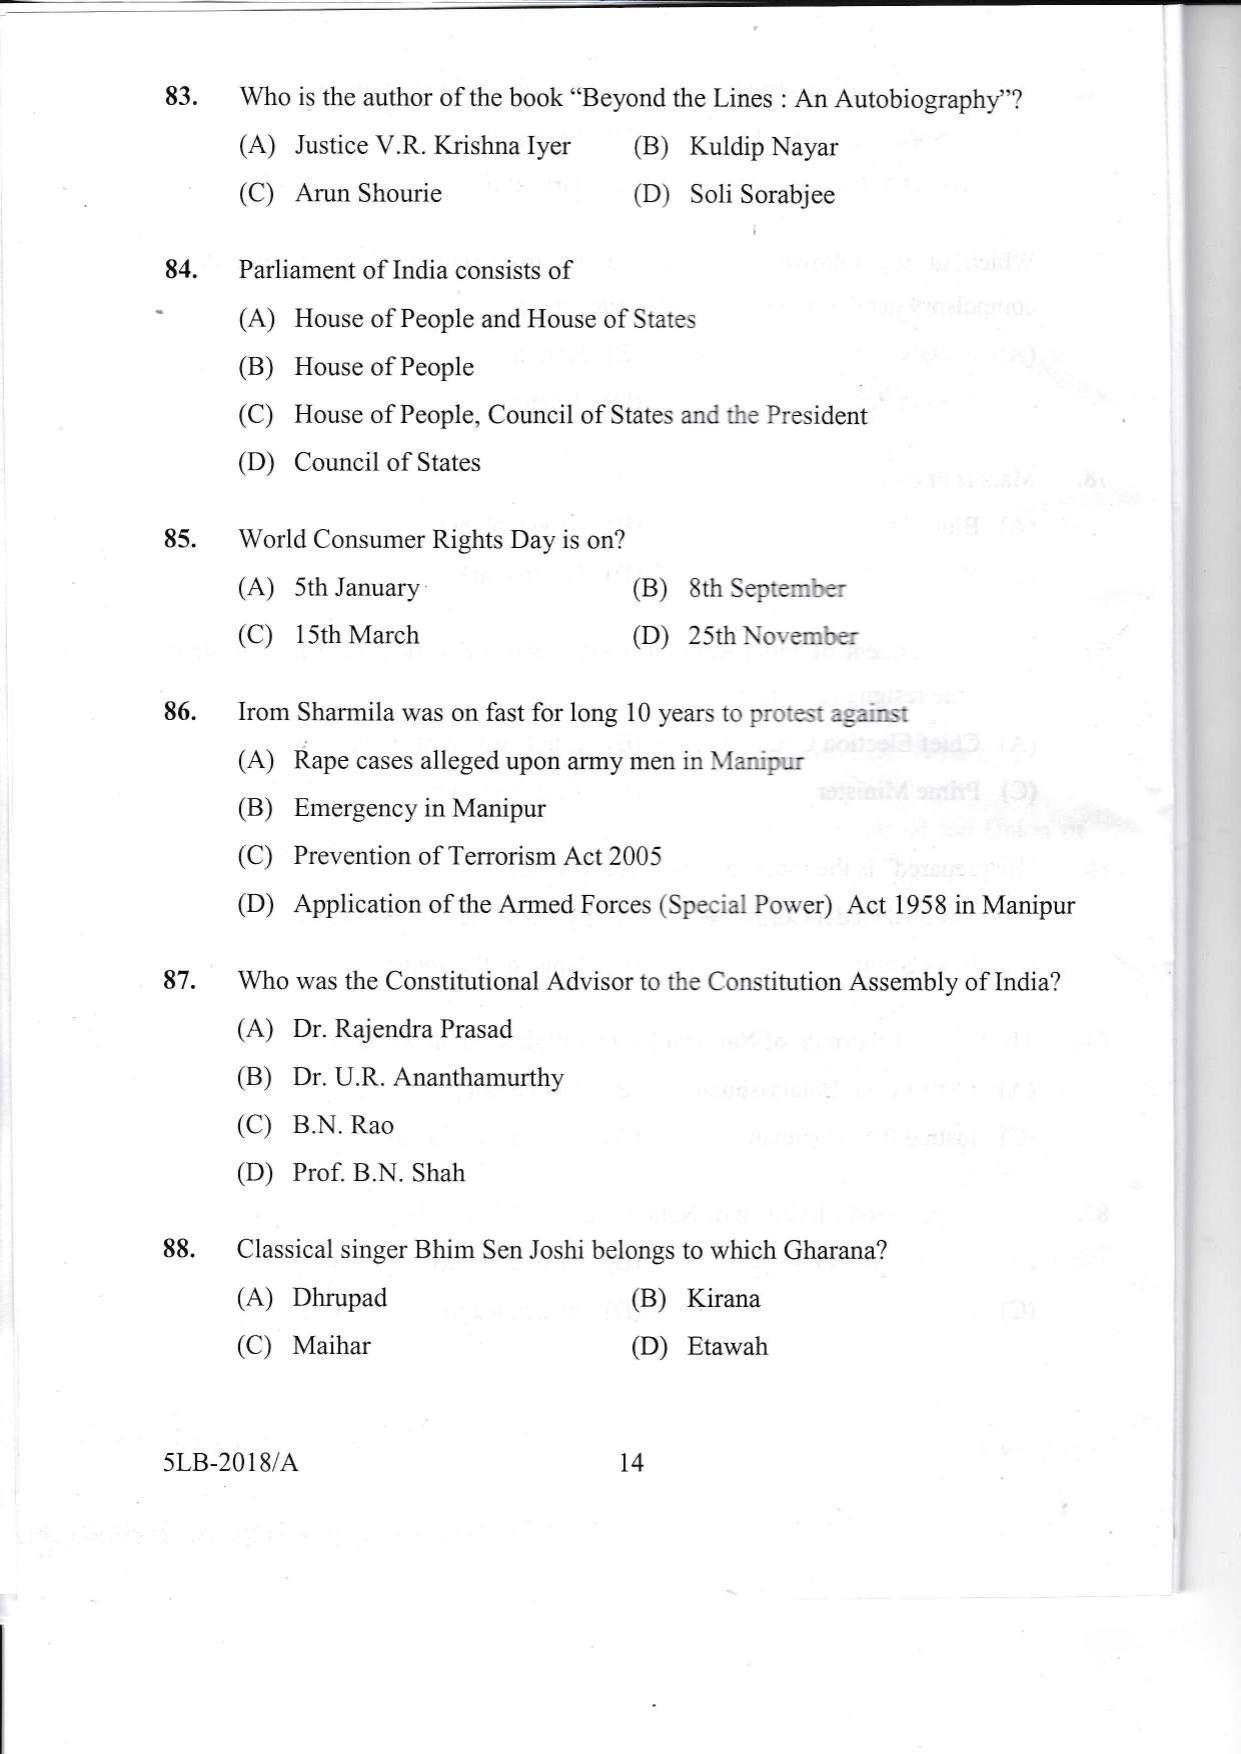 KLEE 5 Year LLB Exam 2018 Question Paper - Page 14